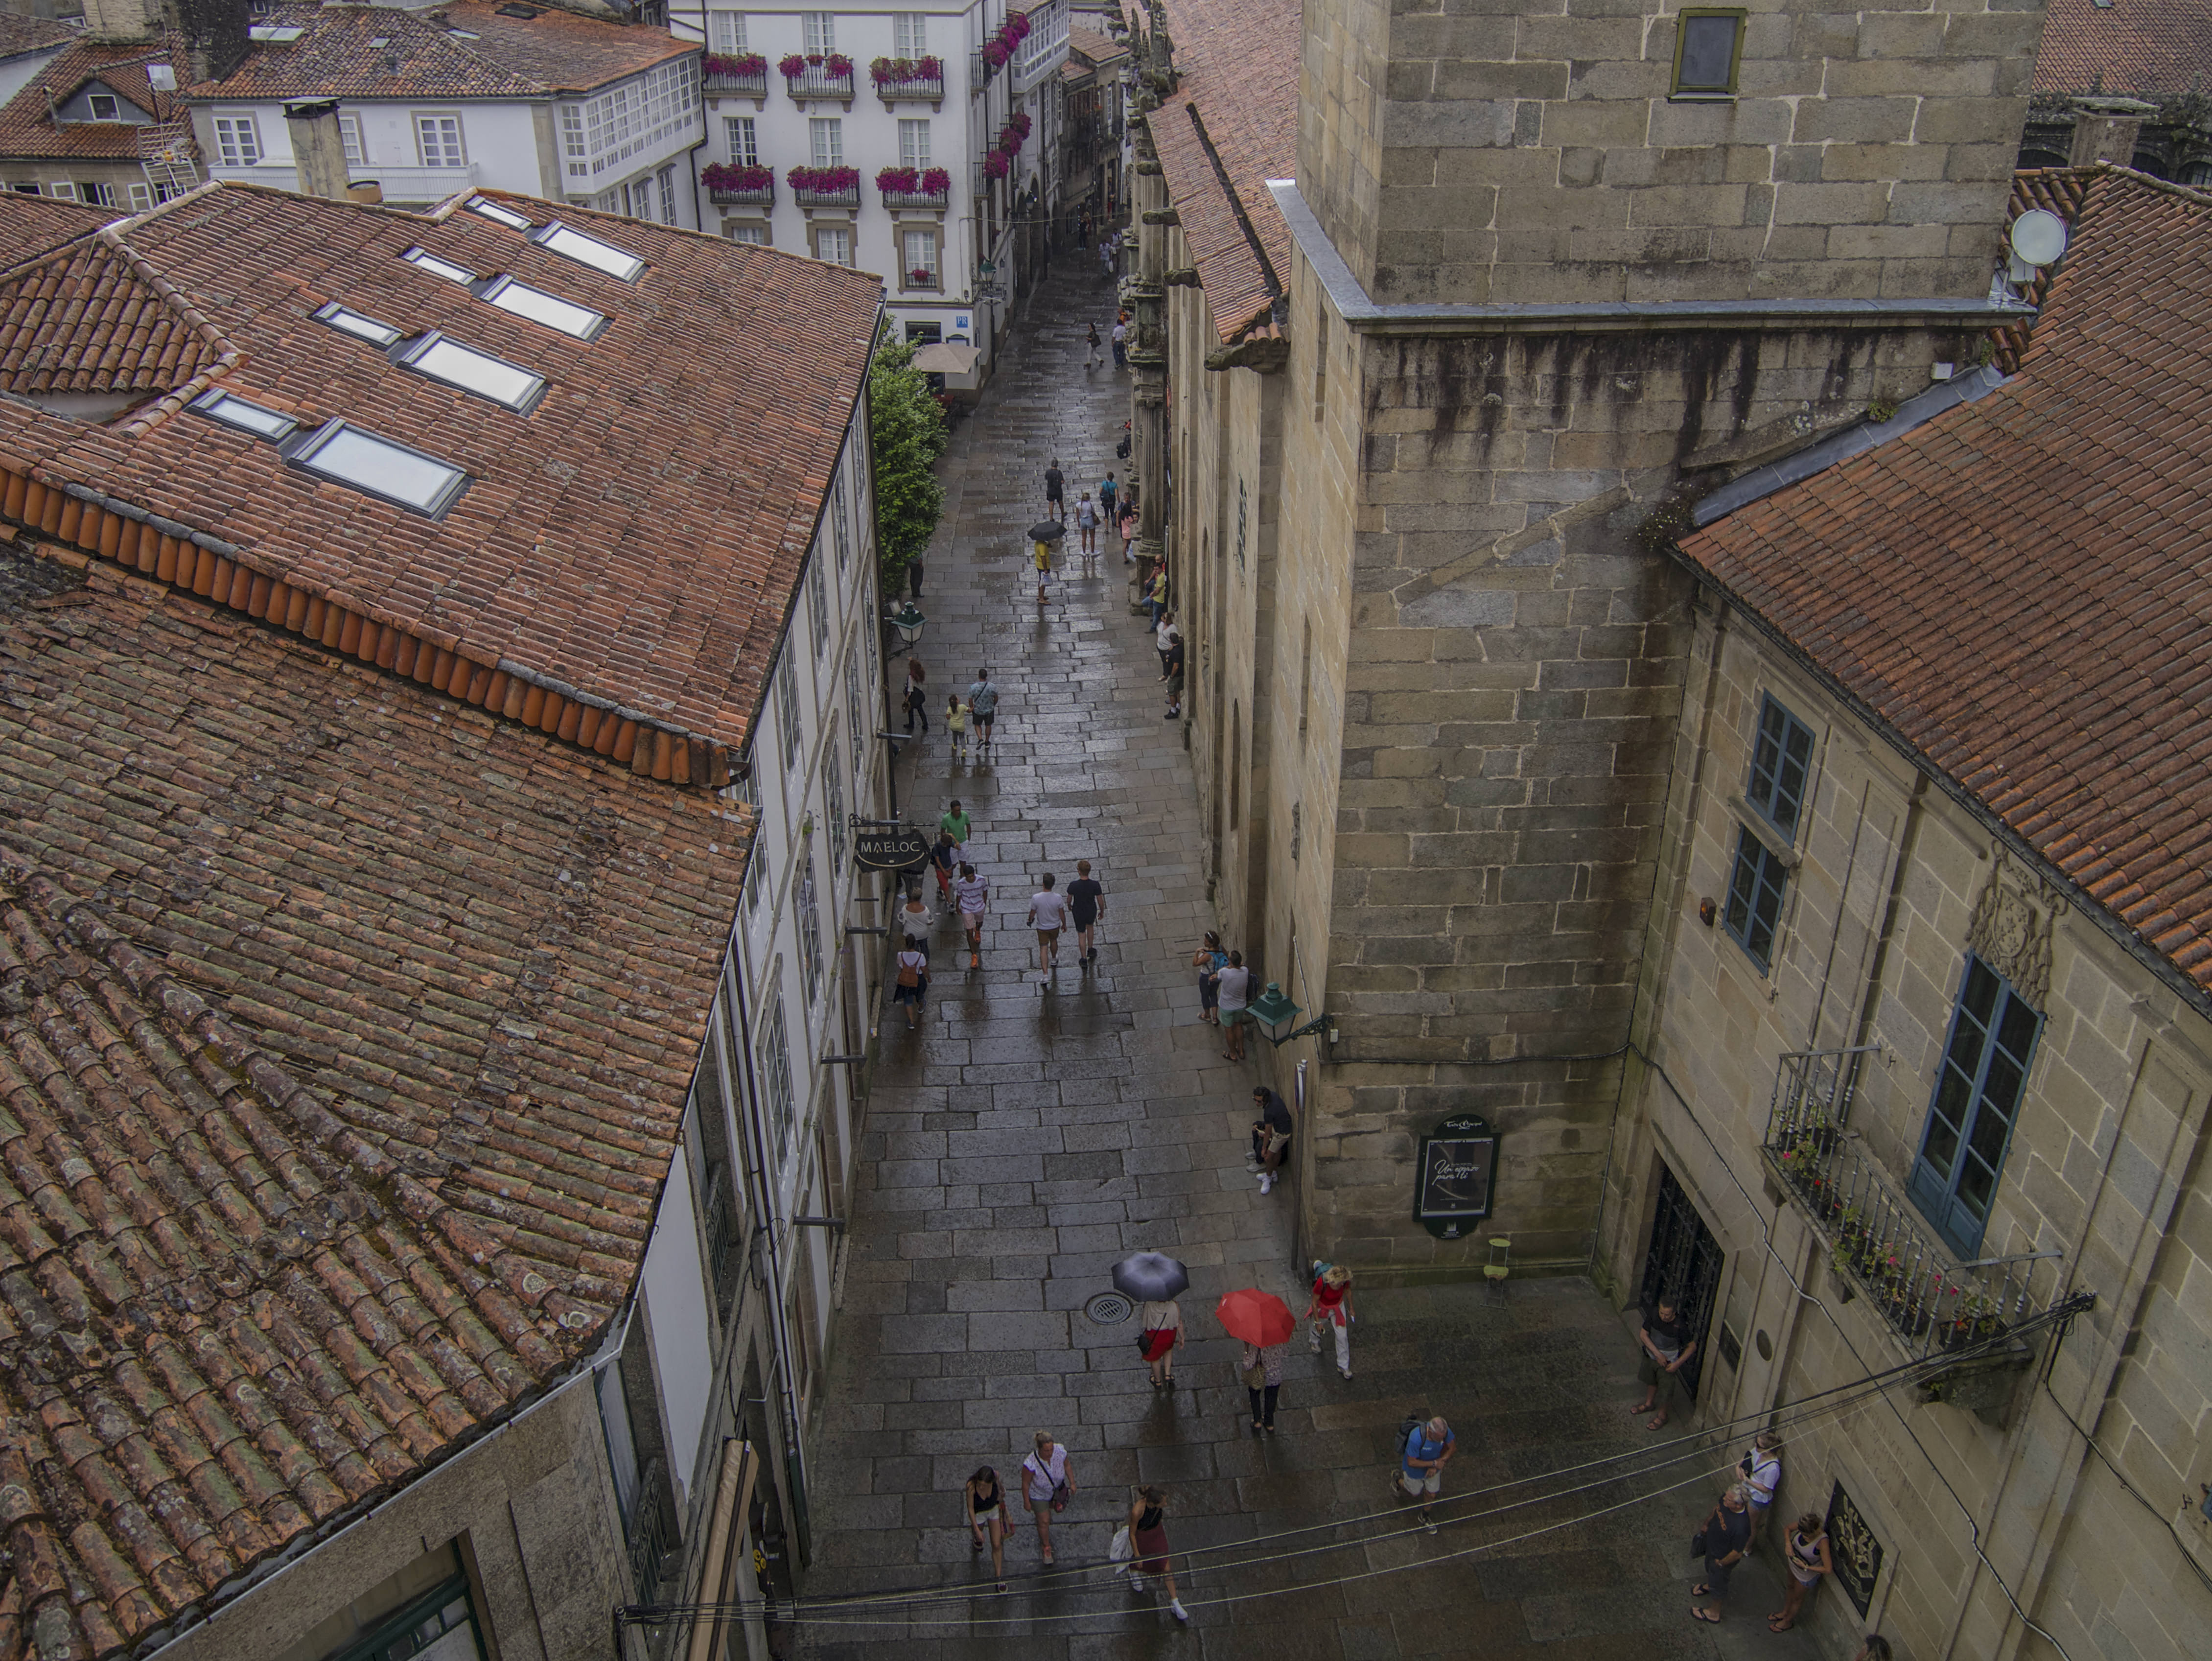 View of Santiago street from above with umbrellas